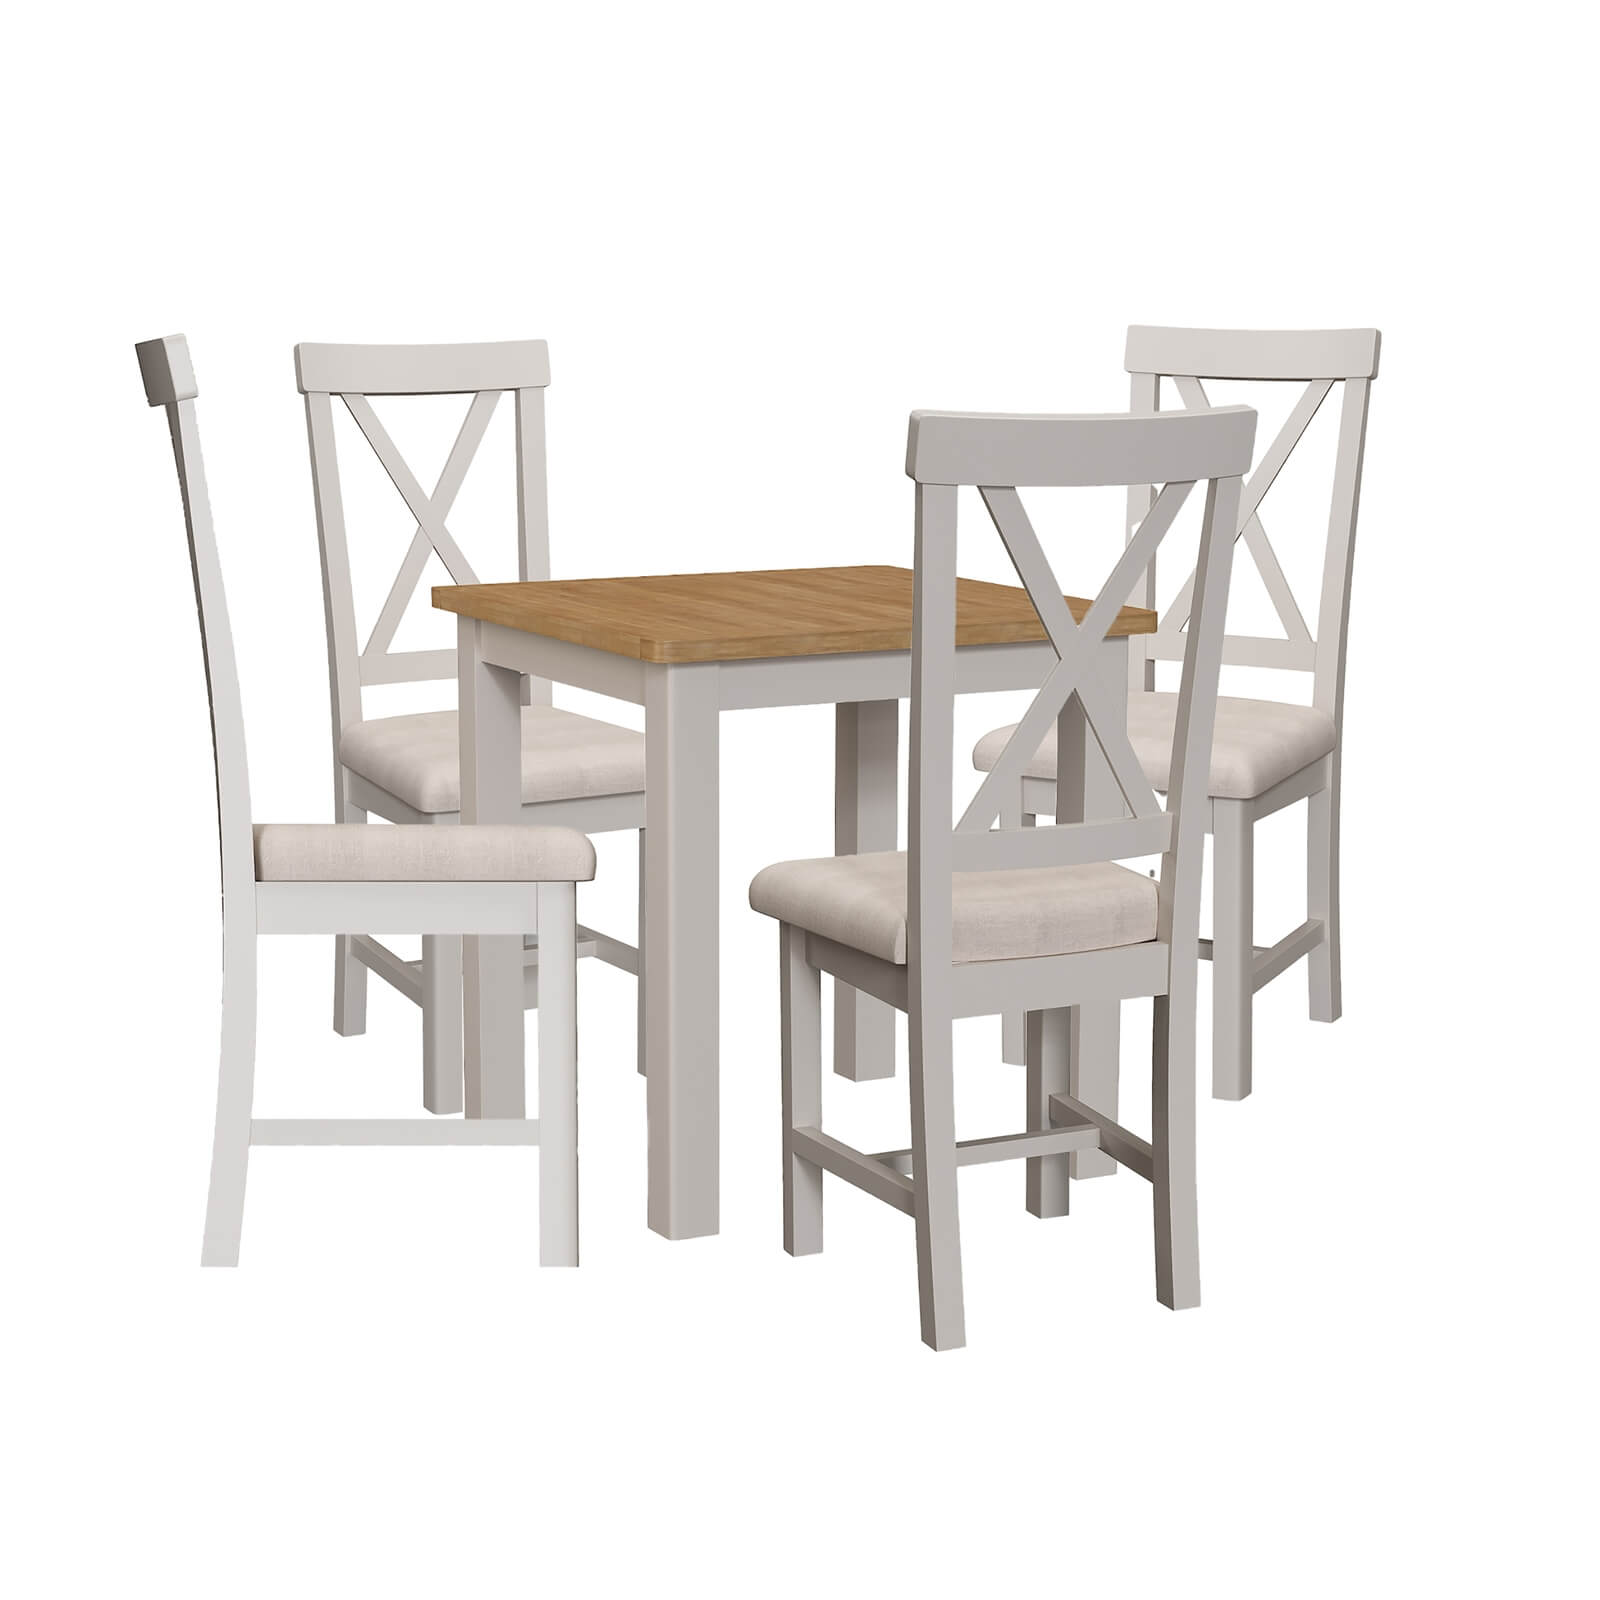 Padstow 4 Seater Dining Set - Grey